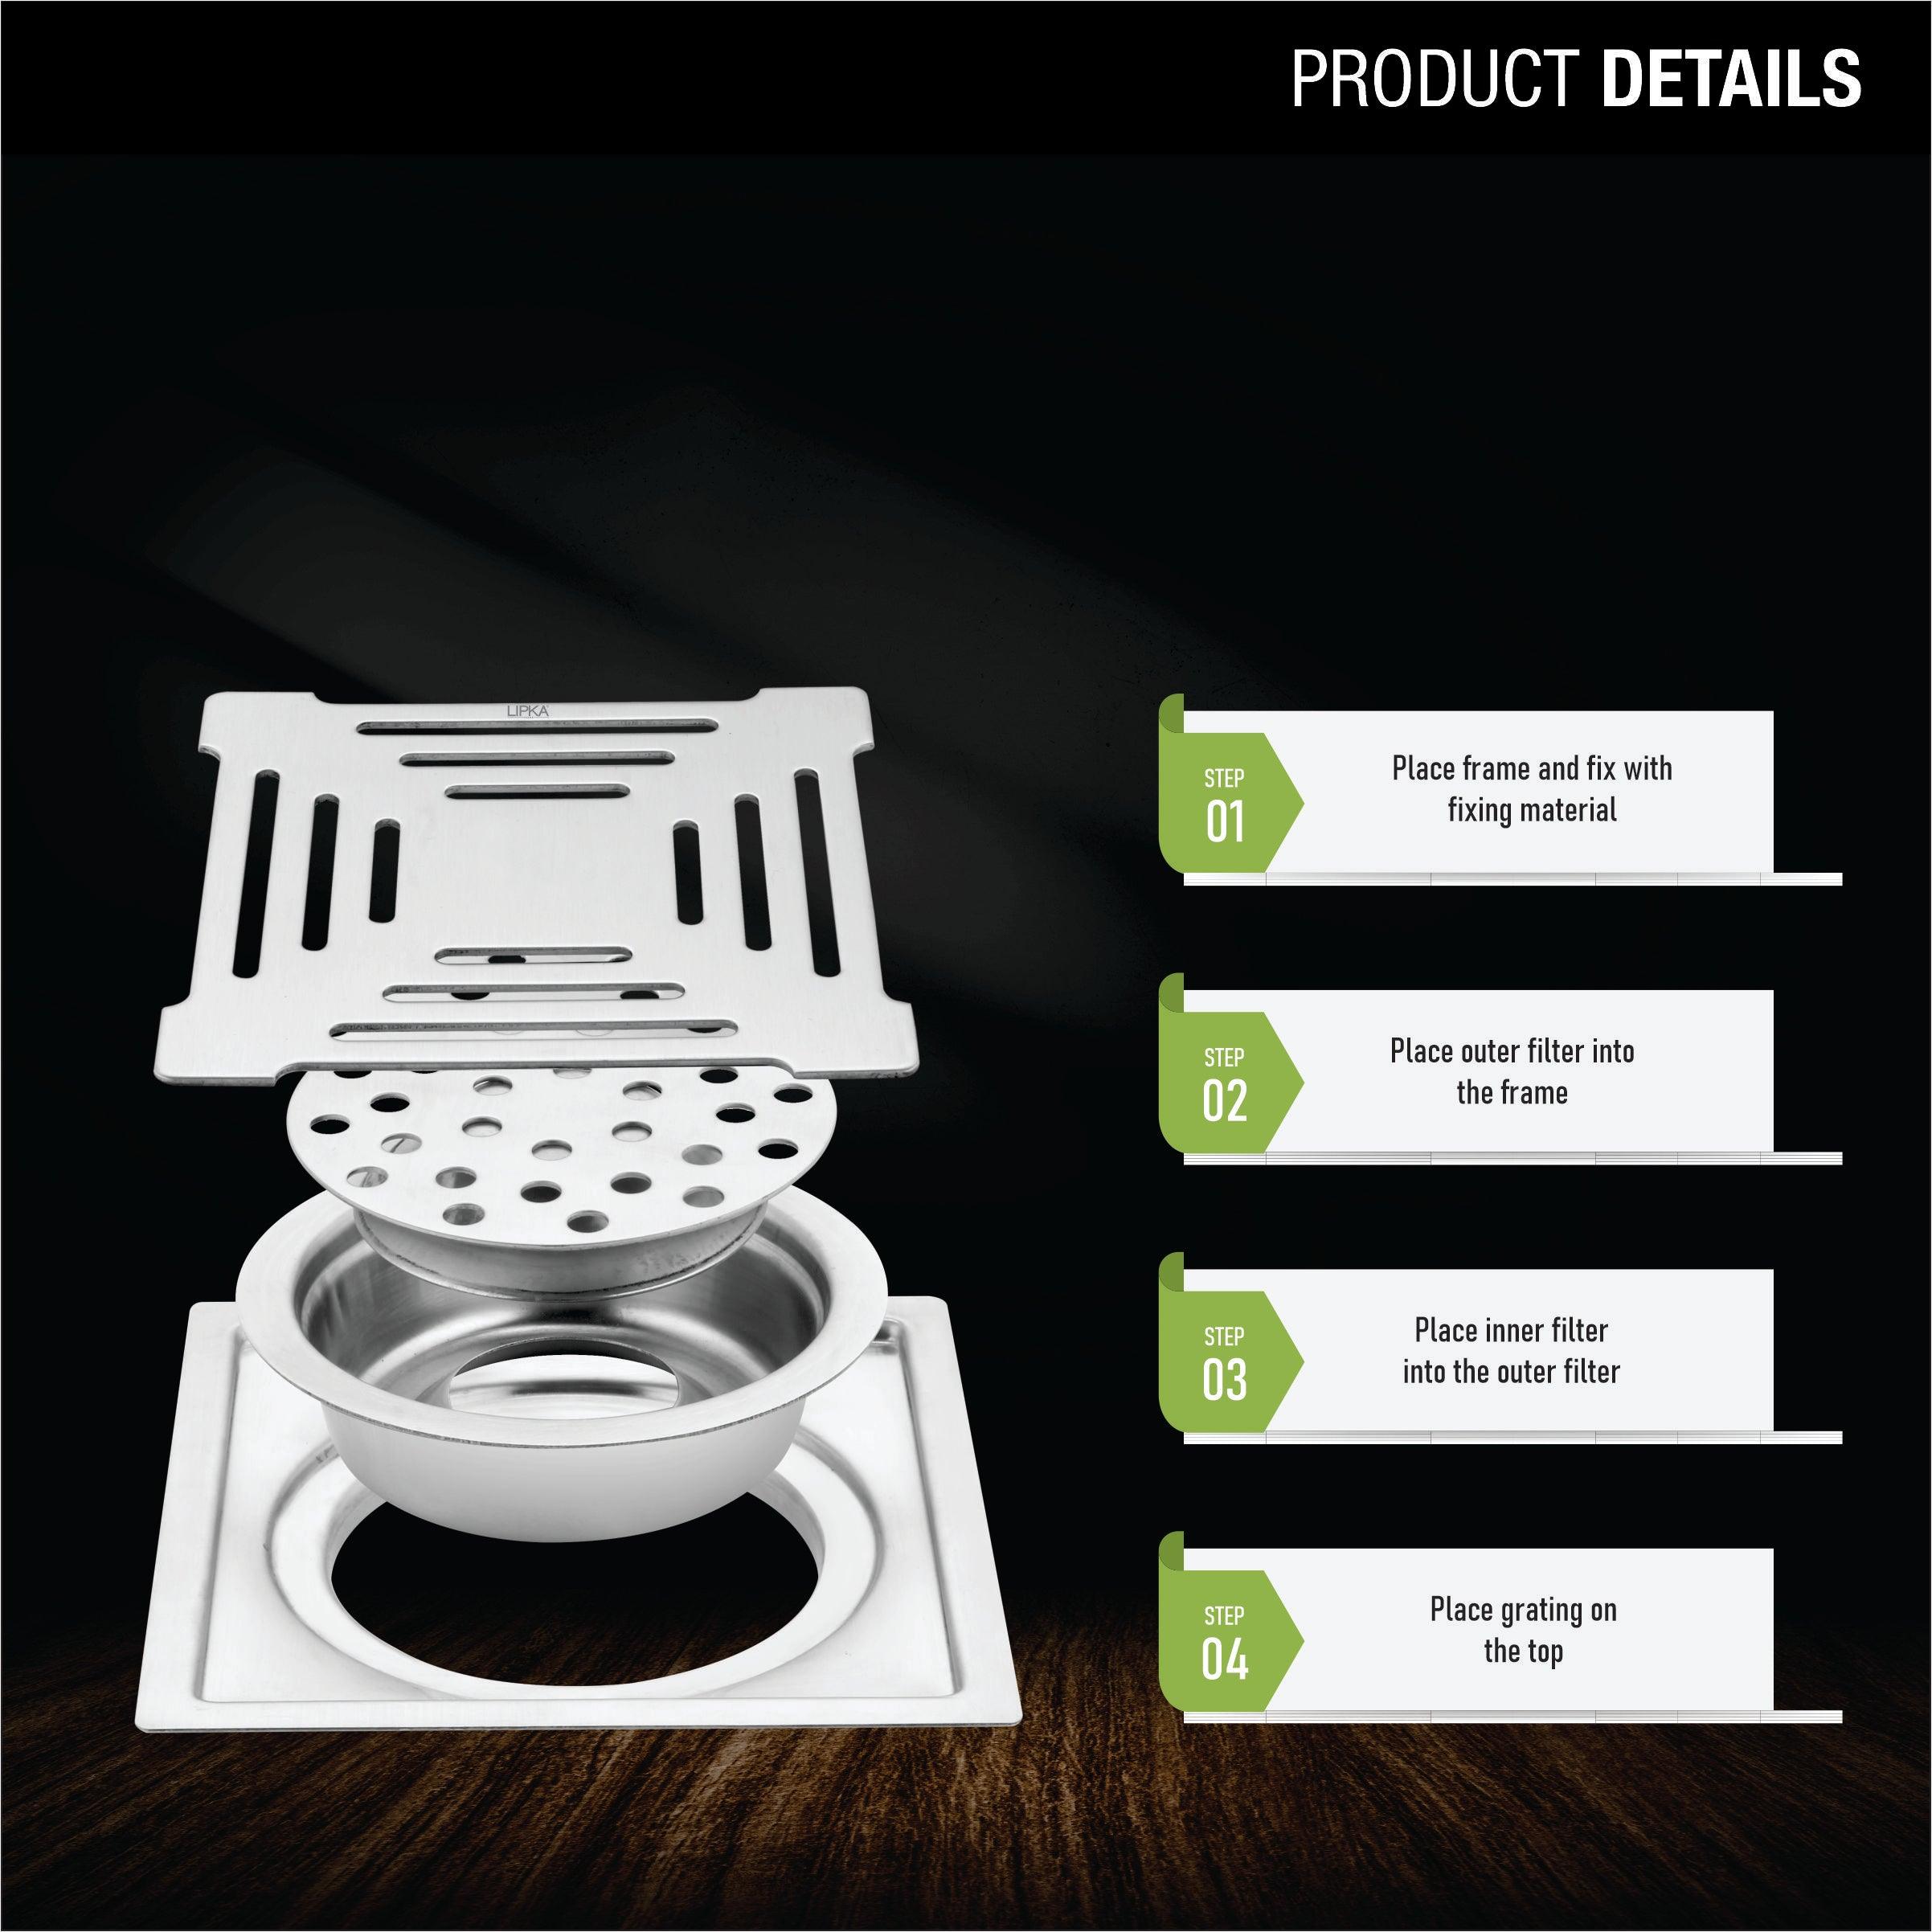 Green Exclusive Square Flat Cut Floor Drain (5 x 5 Inches) with Cockroach Trap product details